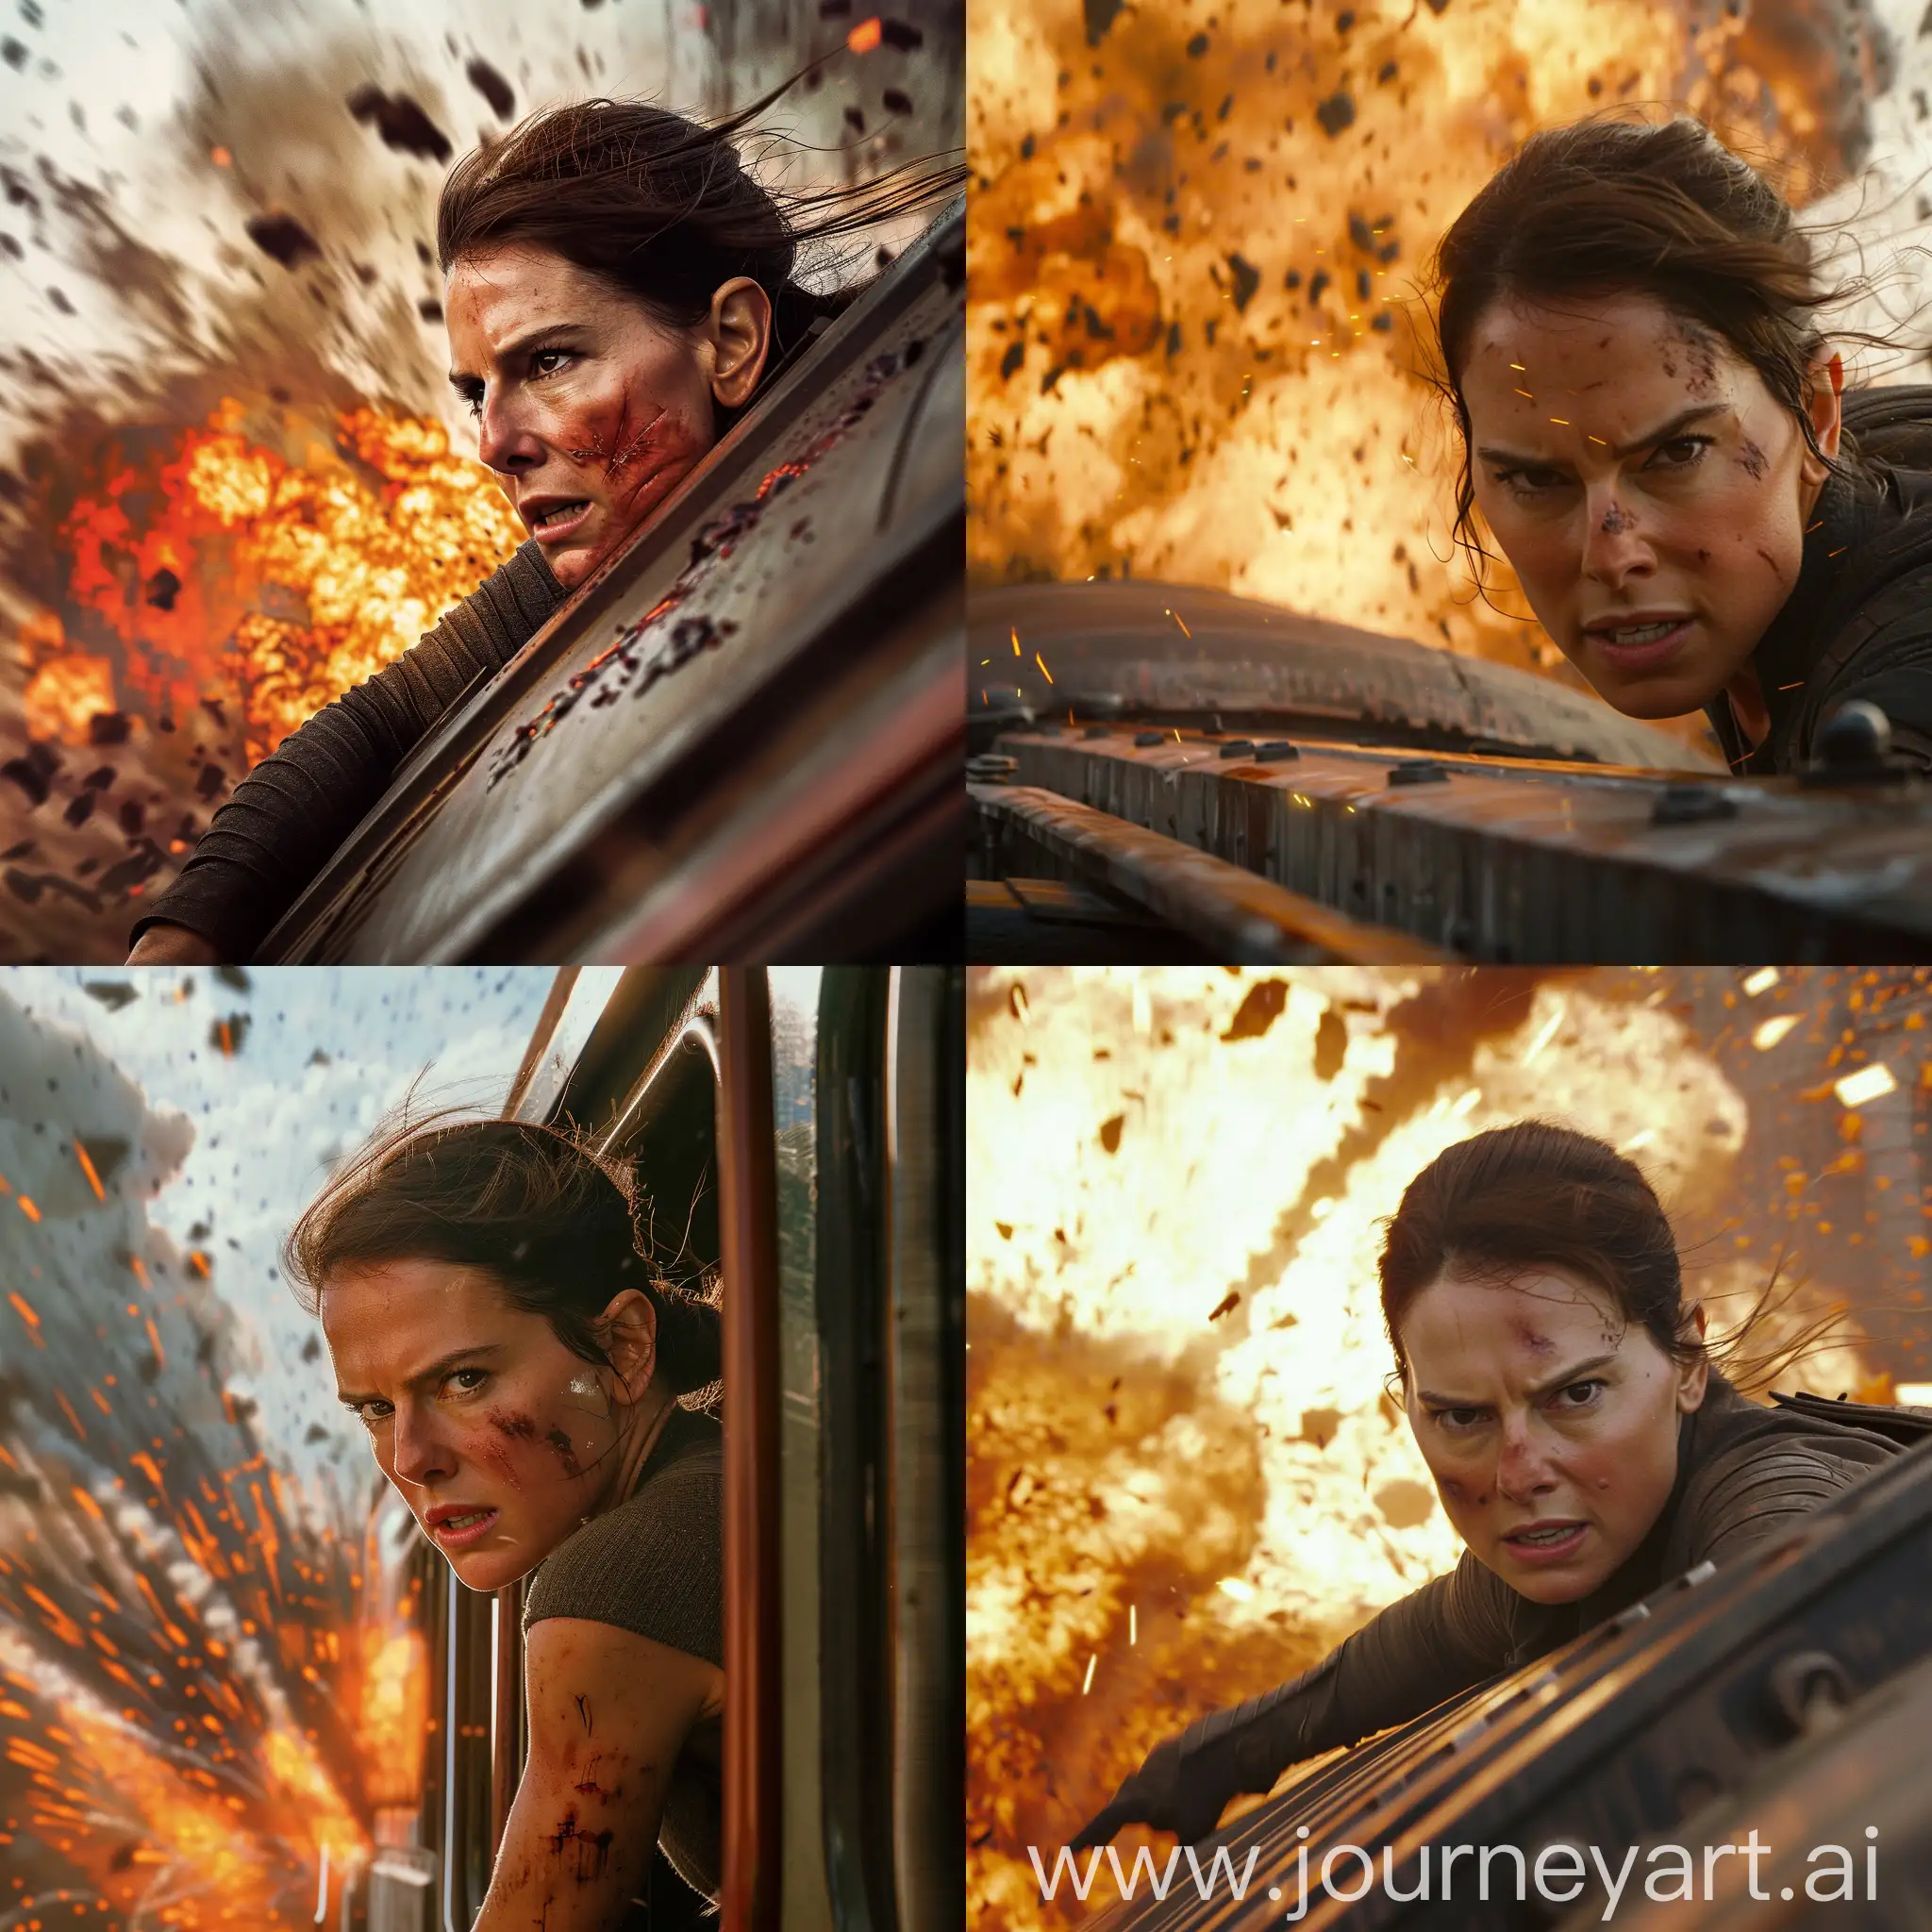 Daisy Ridley With Rey Skywalker's face in New Movie of mission Impossible With Tom Cruise in a dangerous scene in on top of The train, great Explosion background in train, 8k 